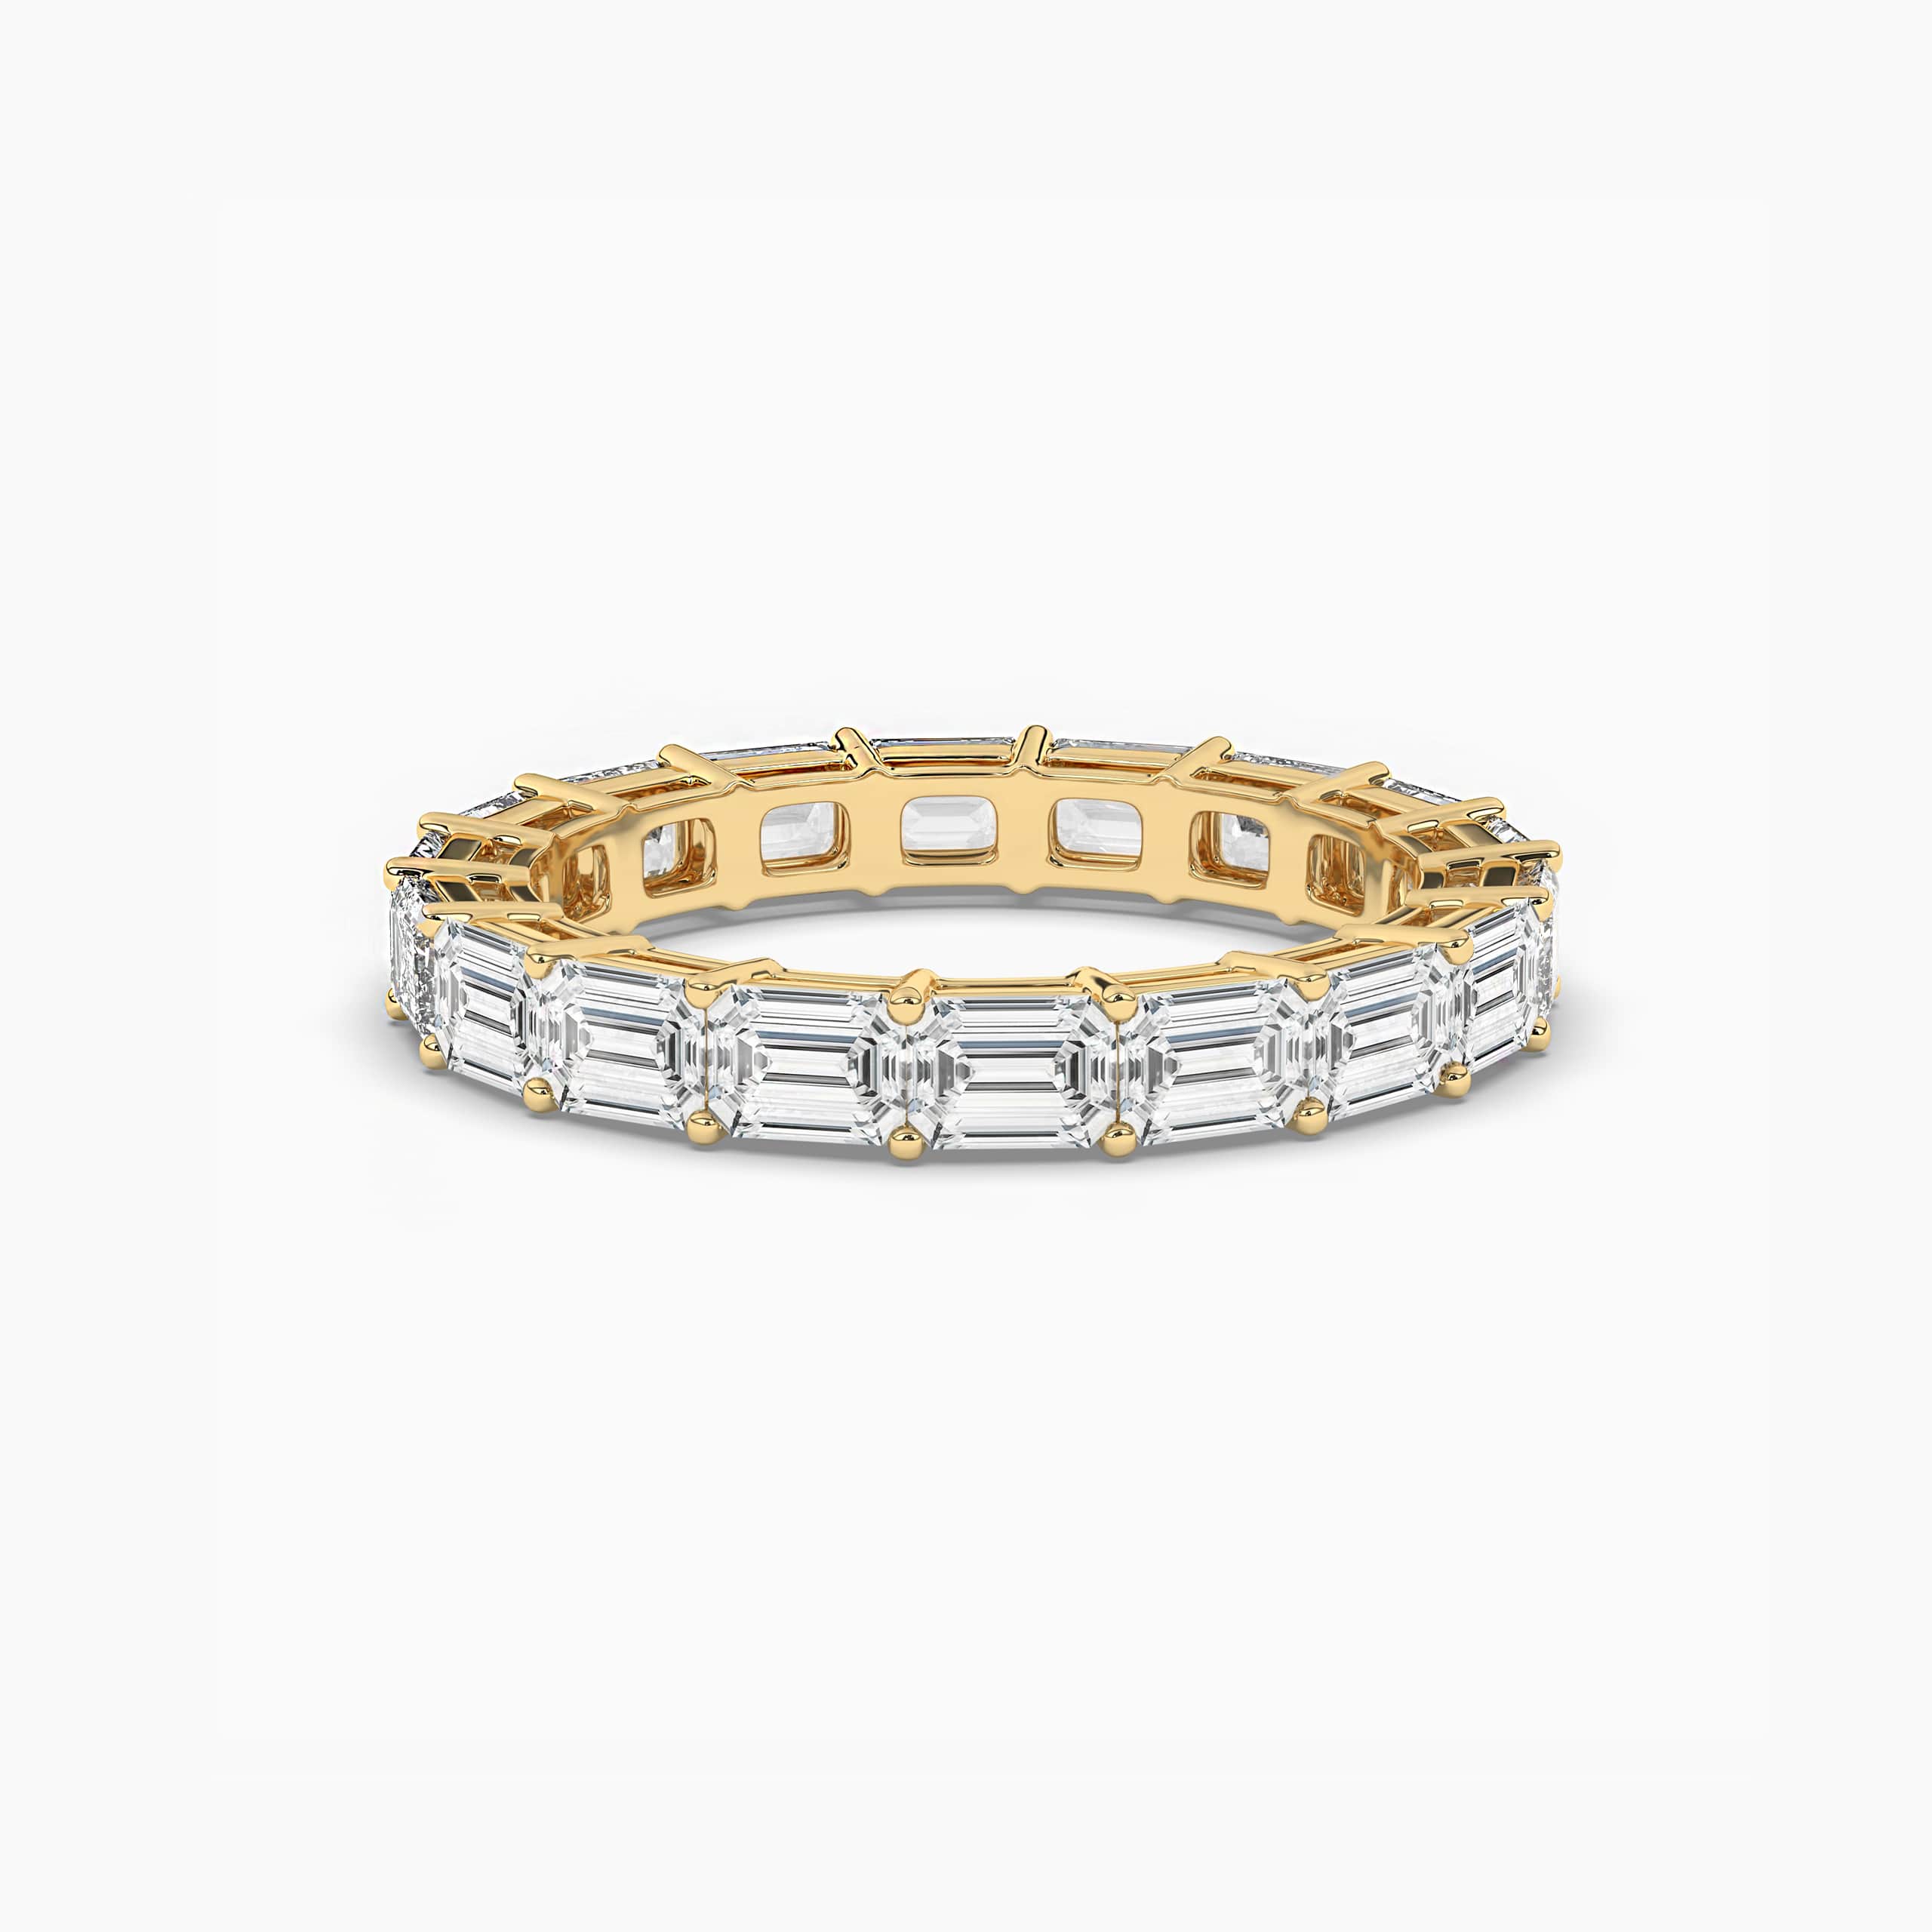 EAST-WEST LAB GROWN DIAMOND ETERNITY RING IN YELLOW GOLD